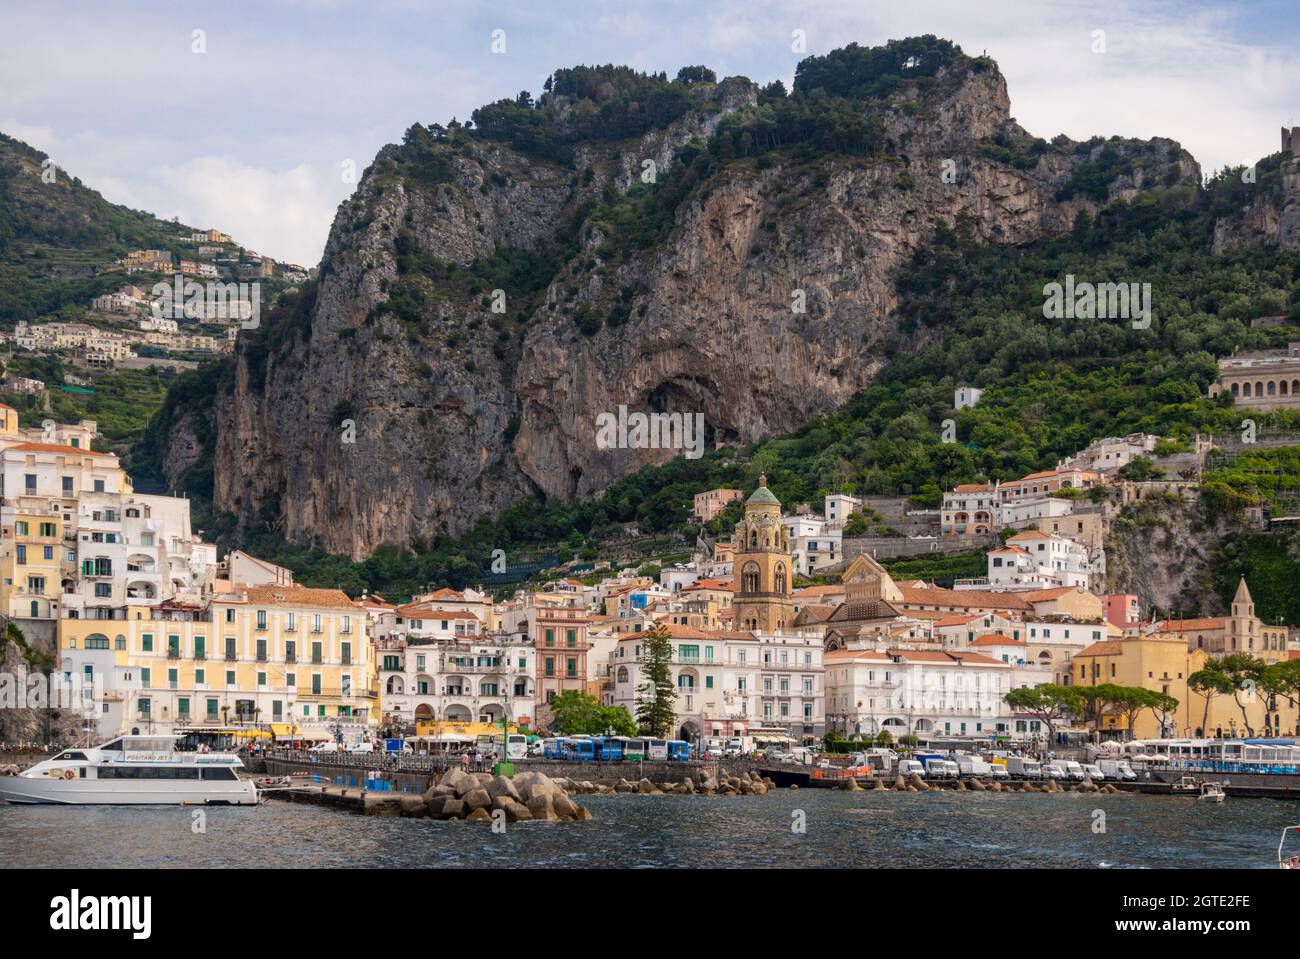 Amalfi town as seen from offshore, Salerno, Campanis, Italy Stock Photo